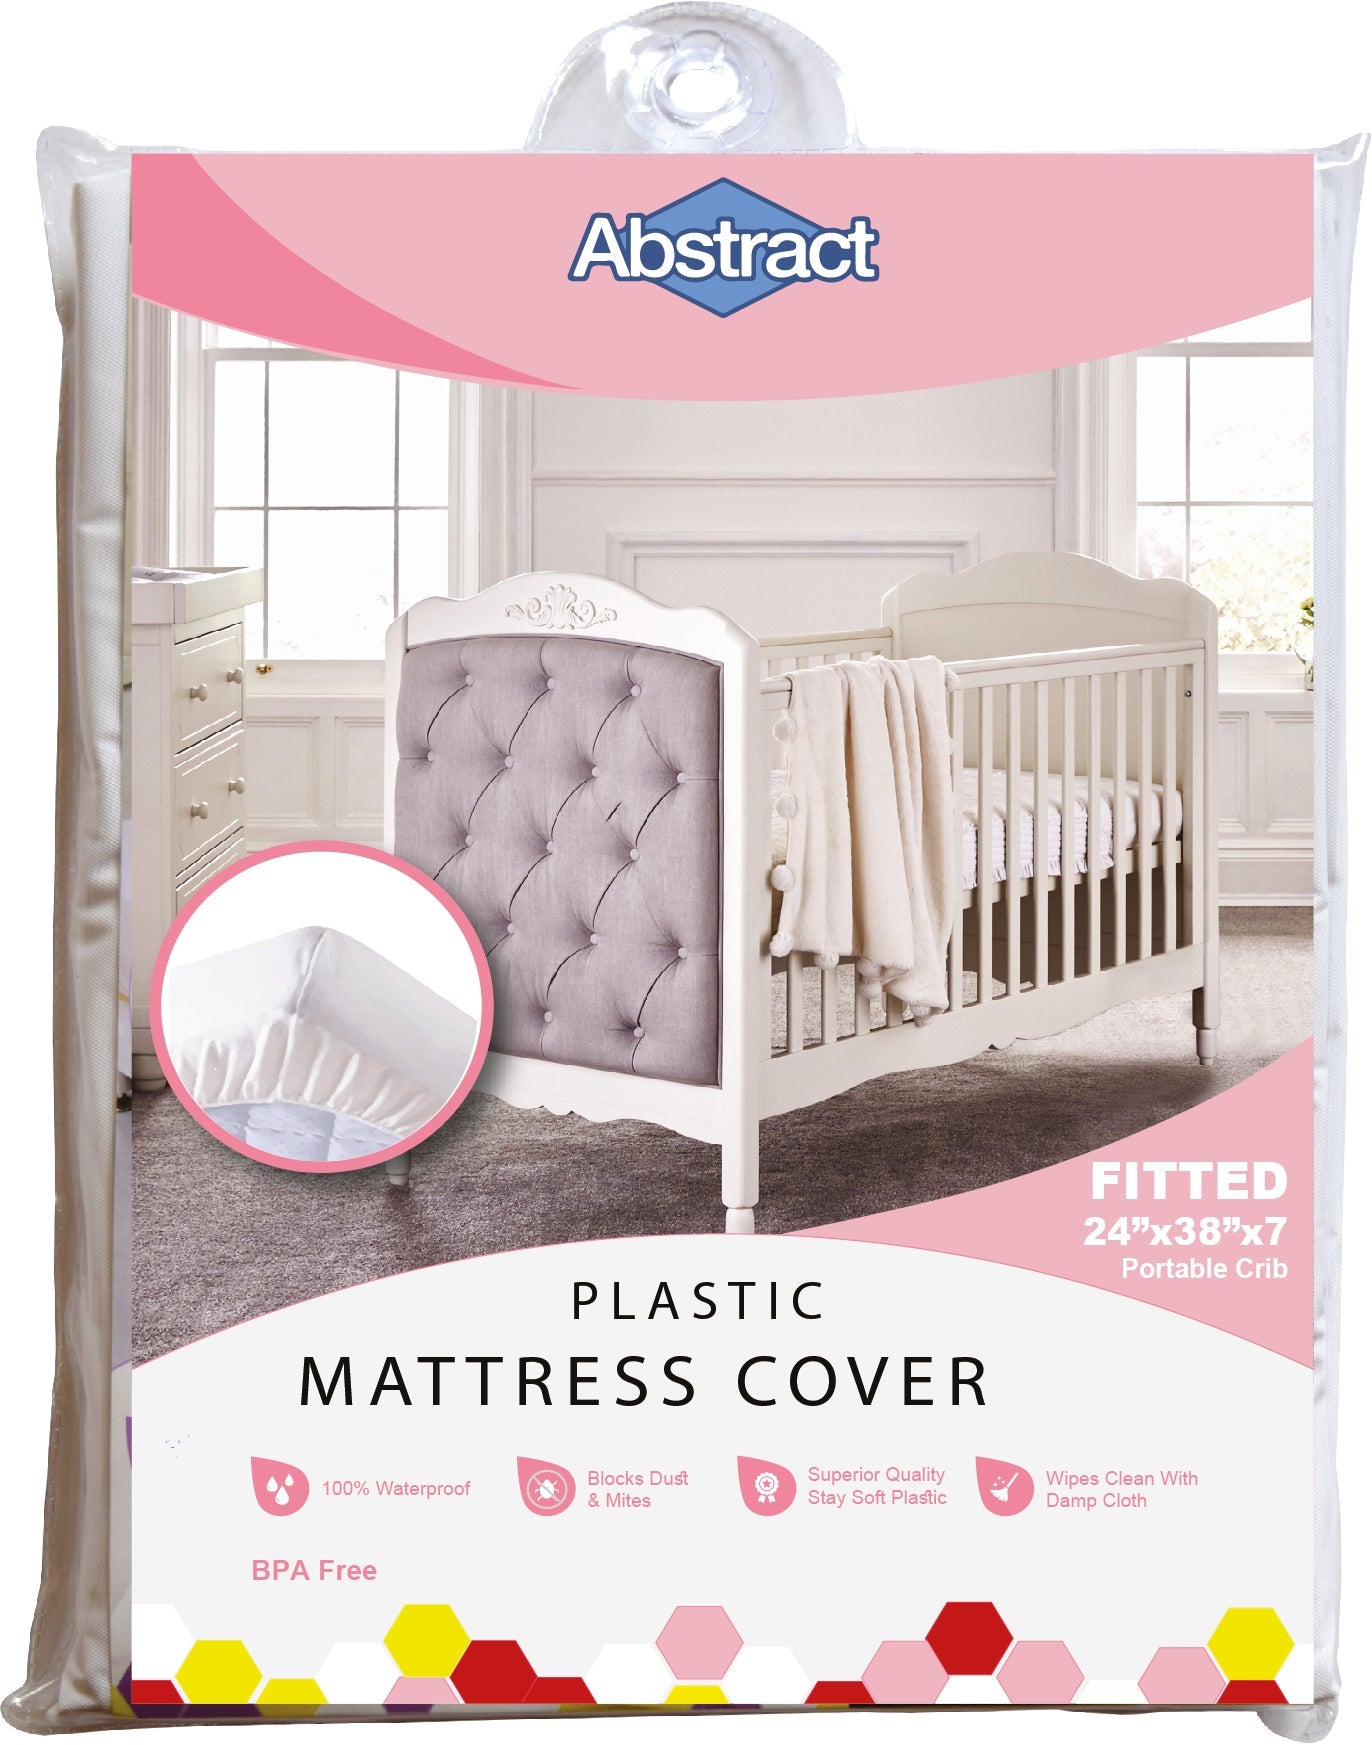 Abstract Plastic Fitted Mattress Cover